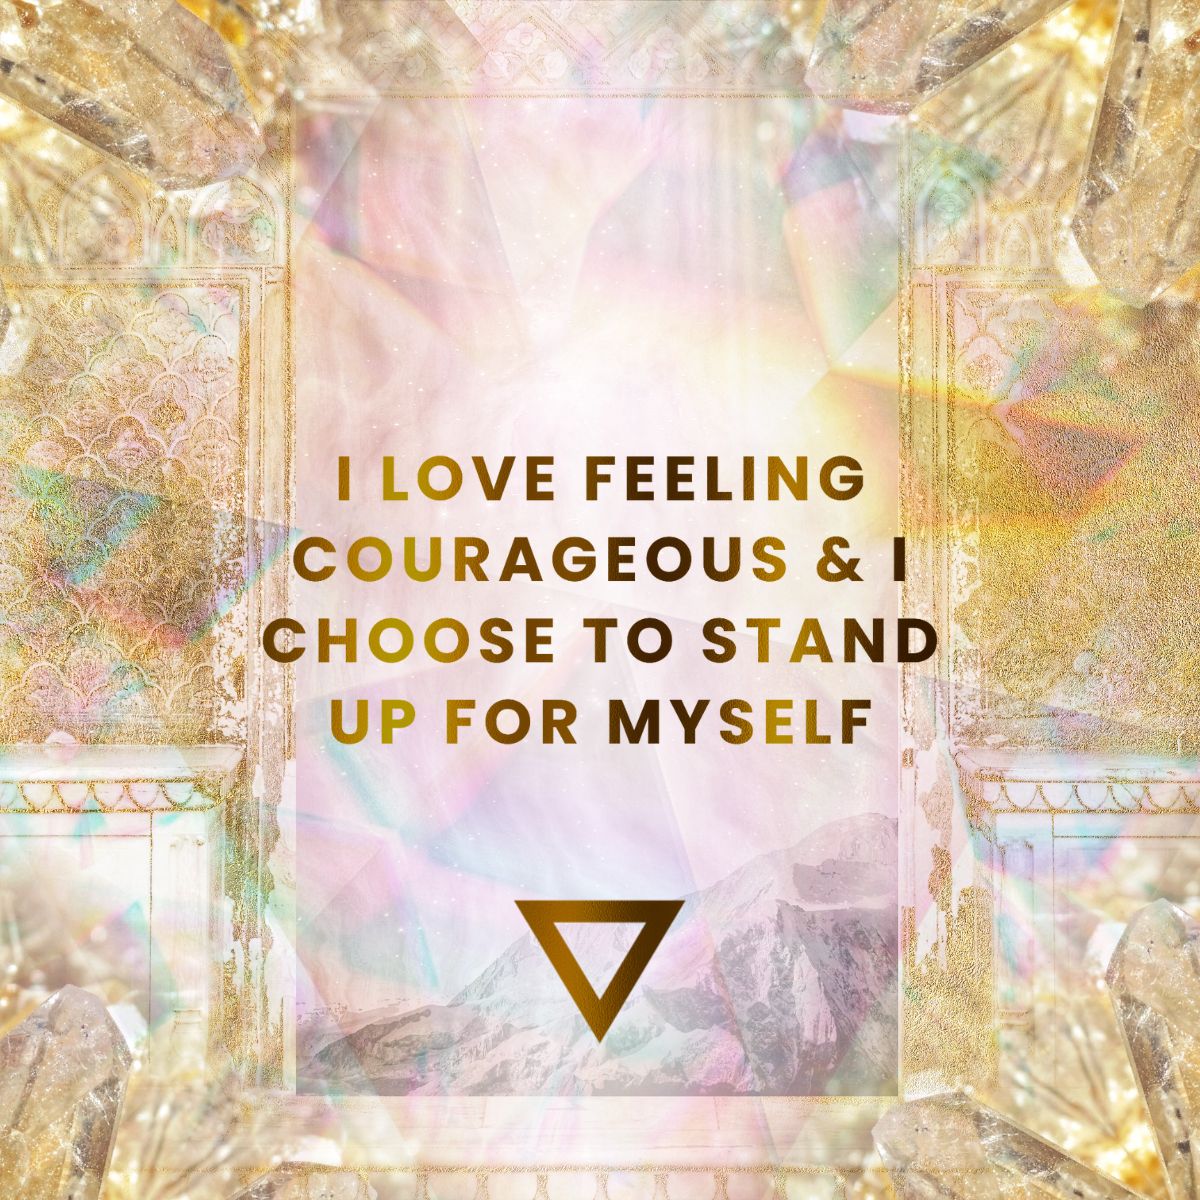 I Love Feeling Courageous & I Choose to Stand Up for Myself